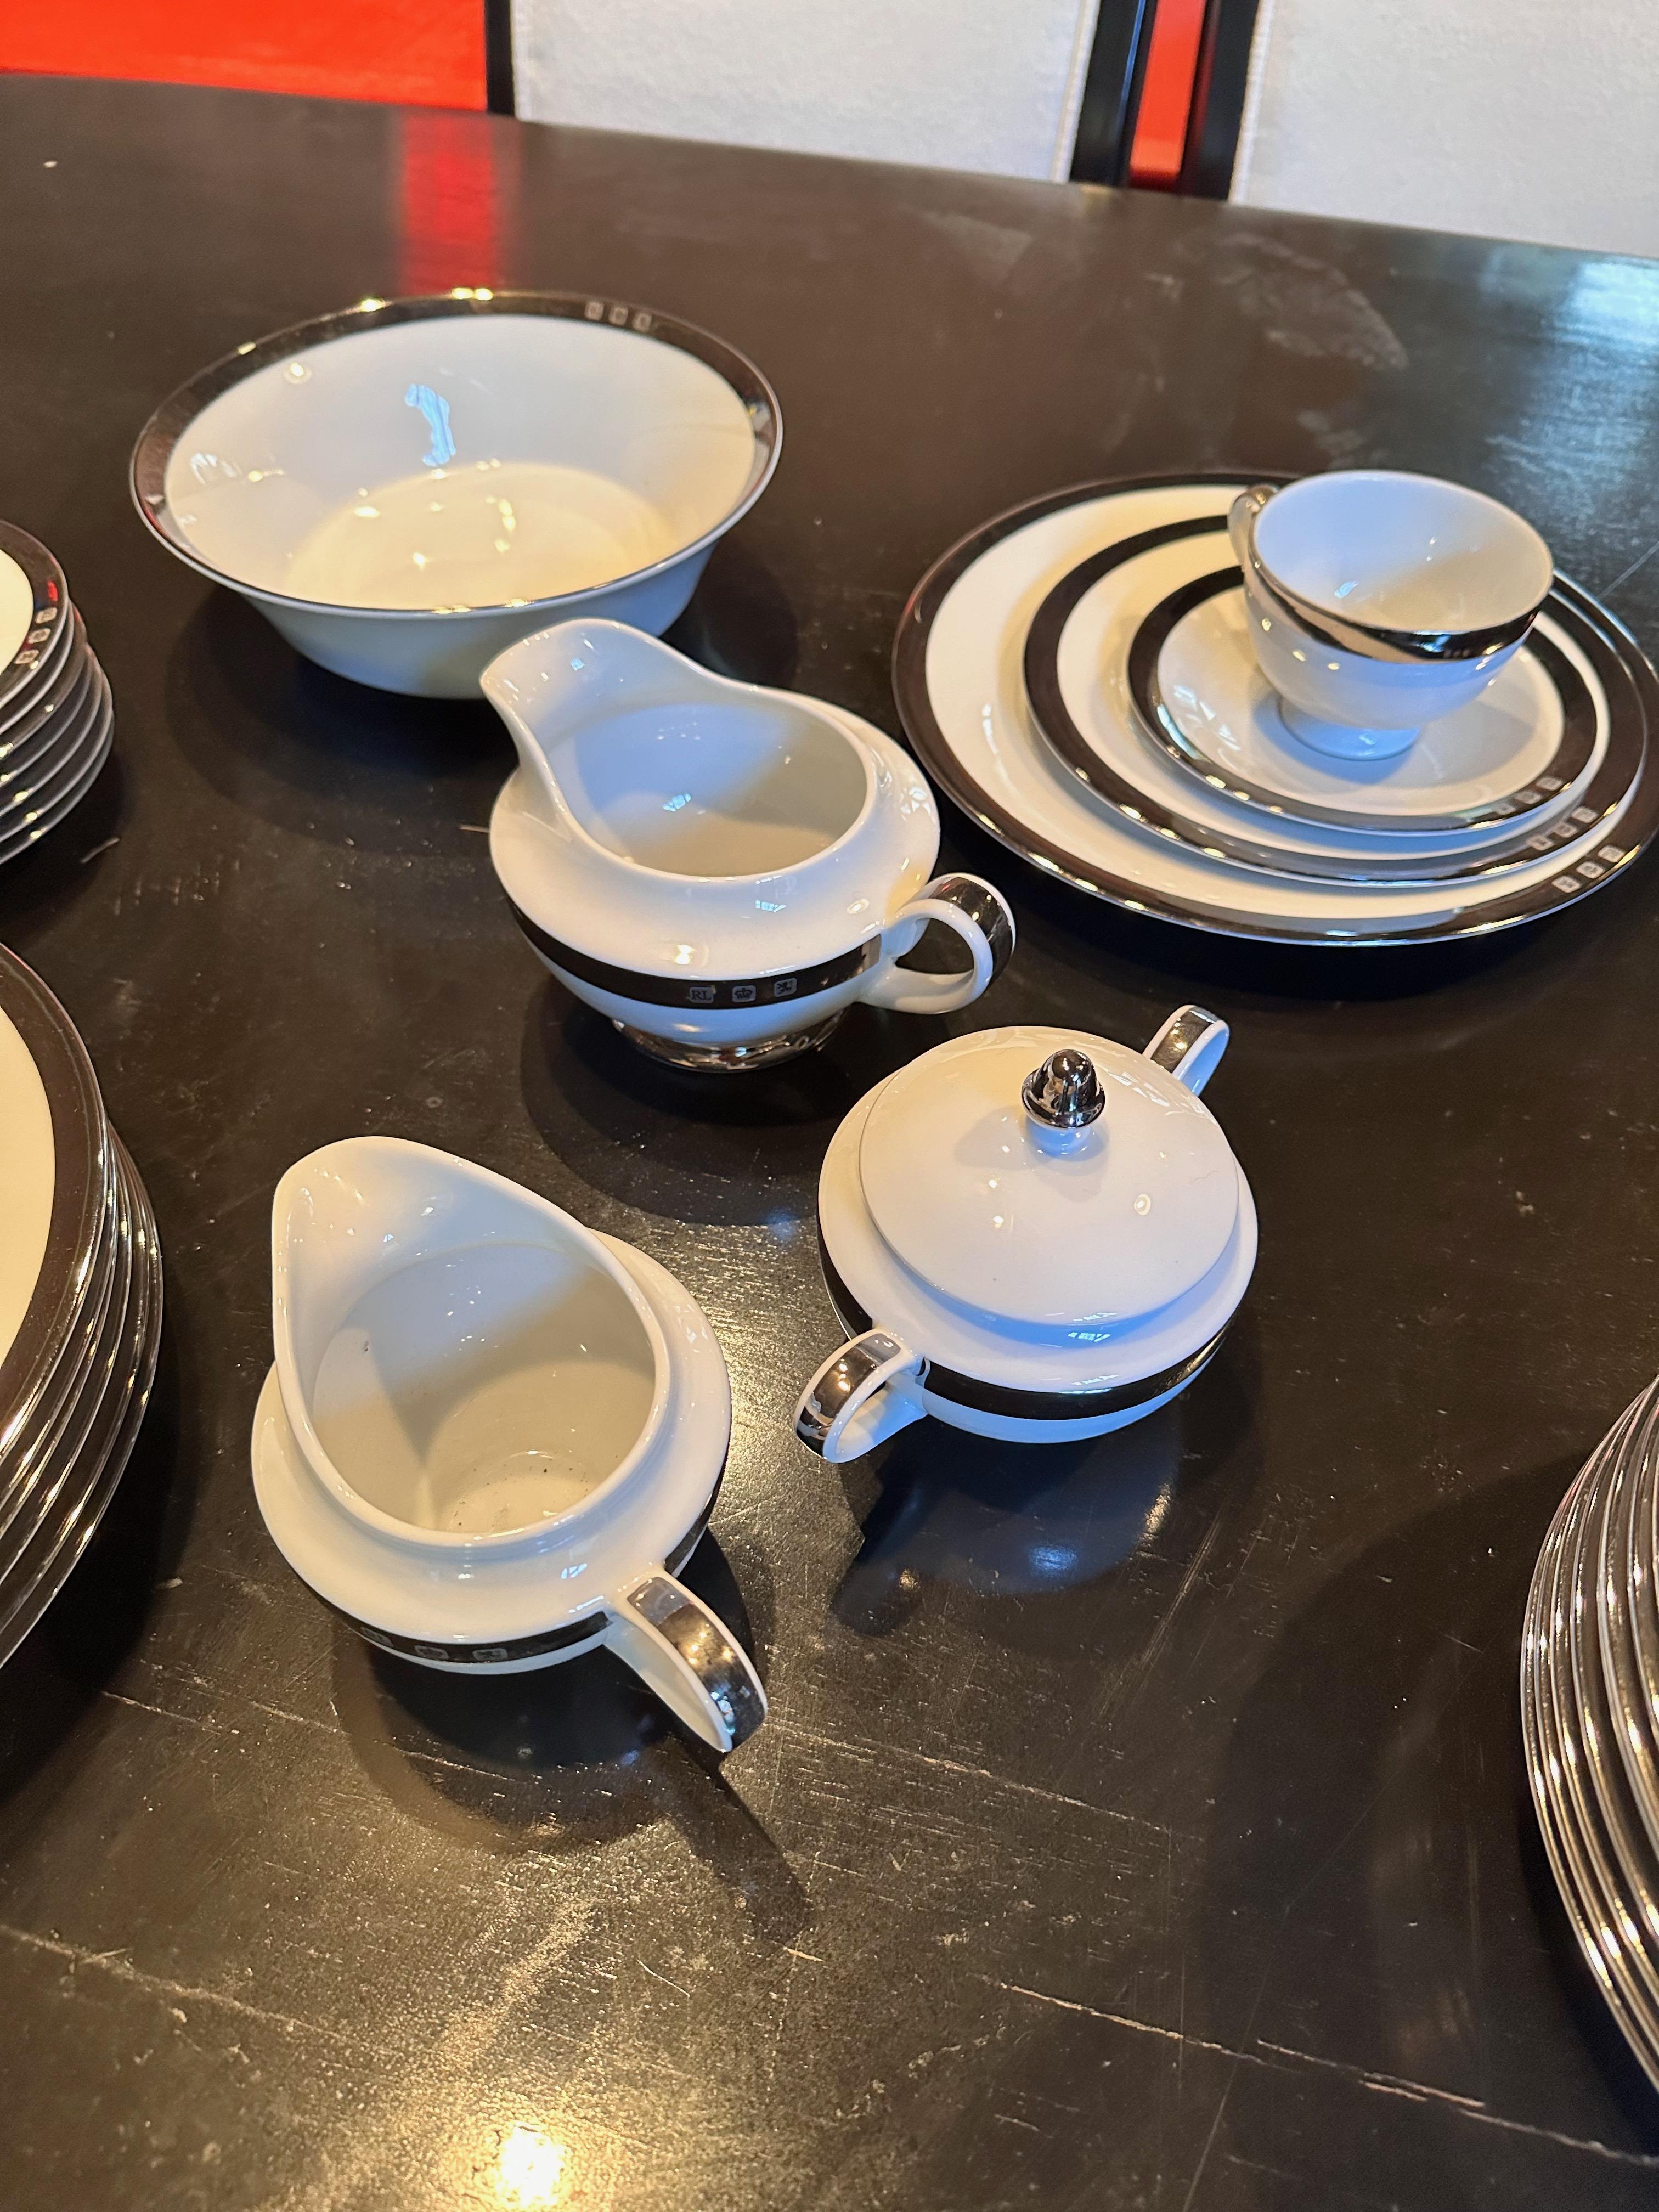 Porcelain Ralph Laurel Academy Platinum Dinner Service for Eight with Many Serving Pieces For Sale